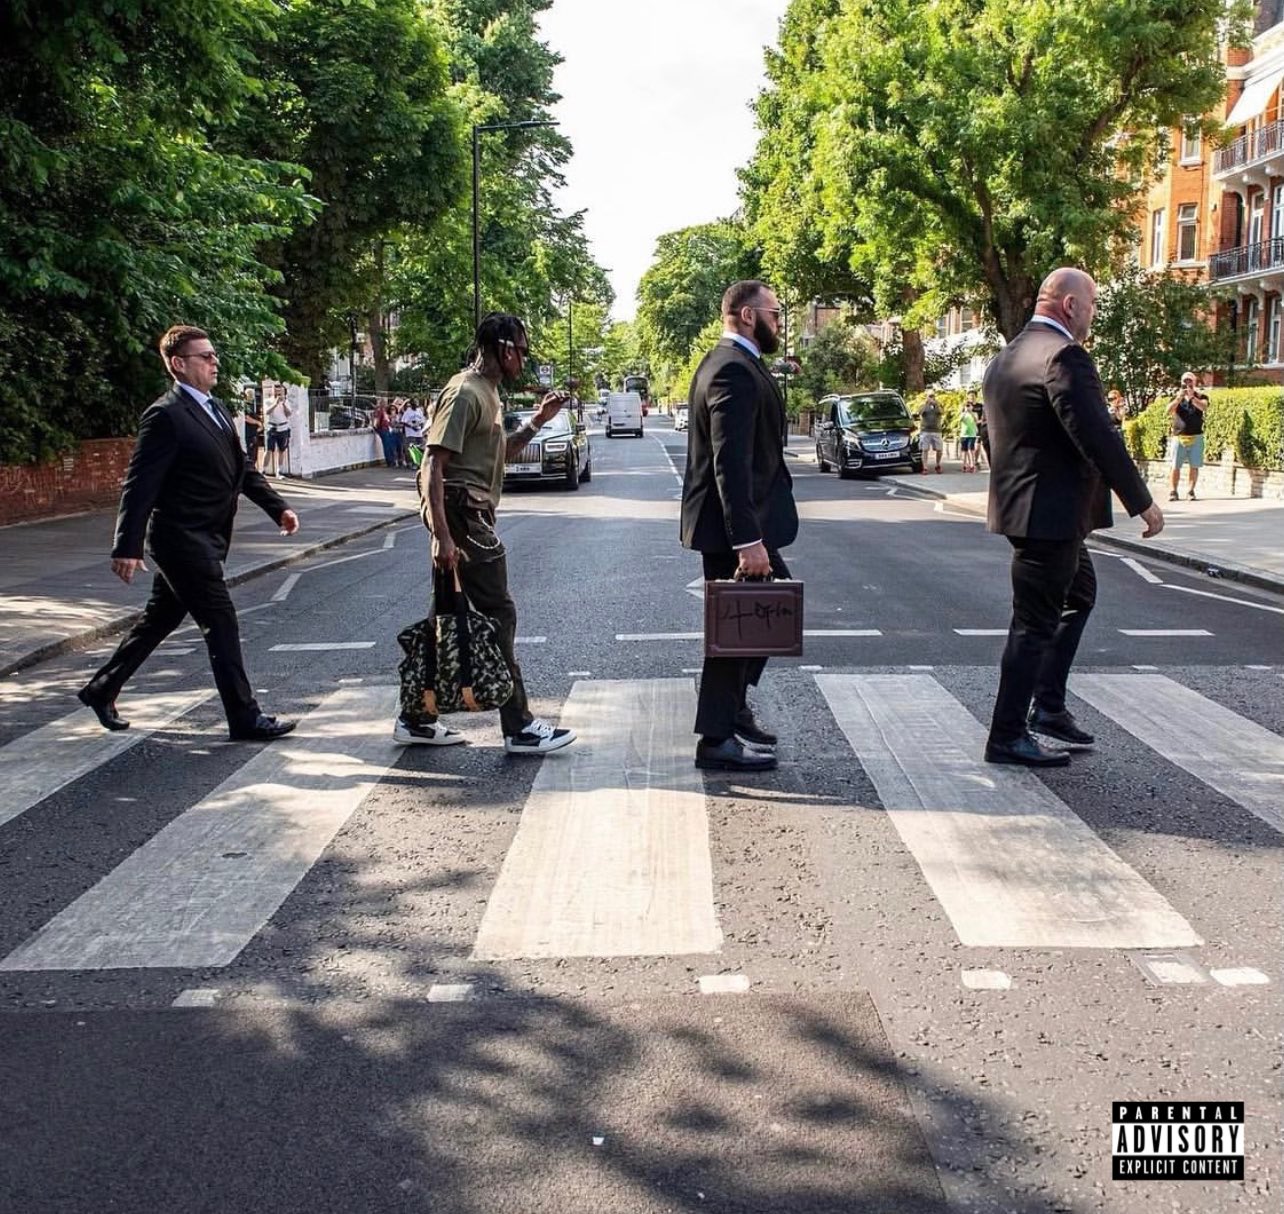 543 Abbey Road Crossing Stock Photos HighRes Pictures and Images  Getty  Images